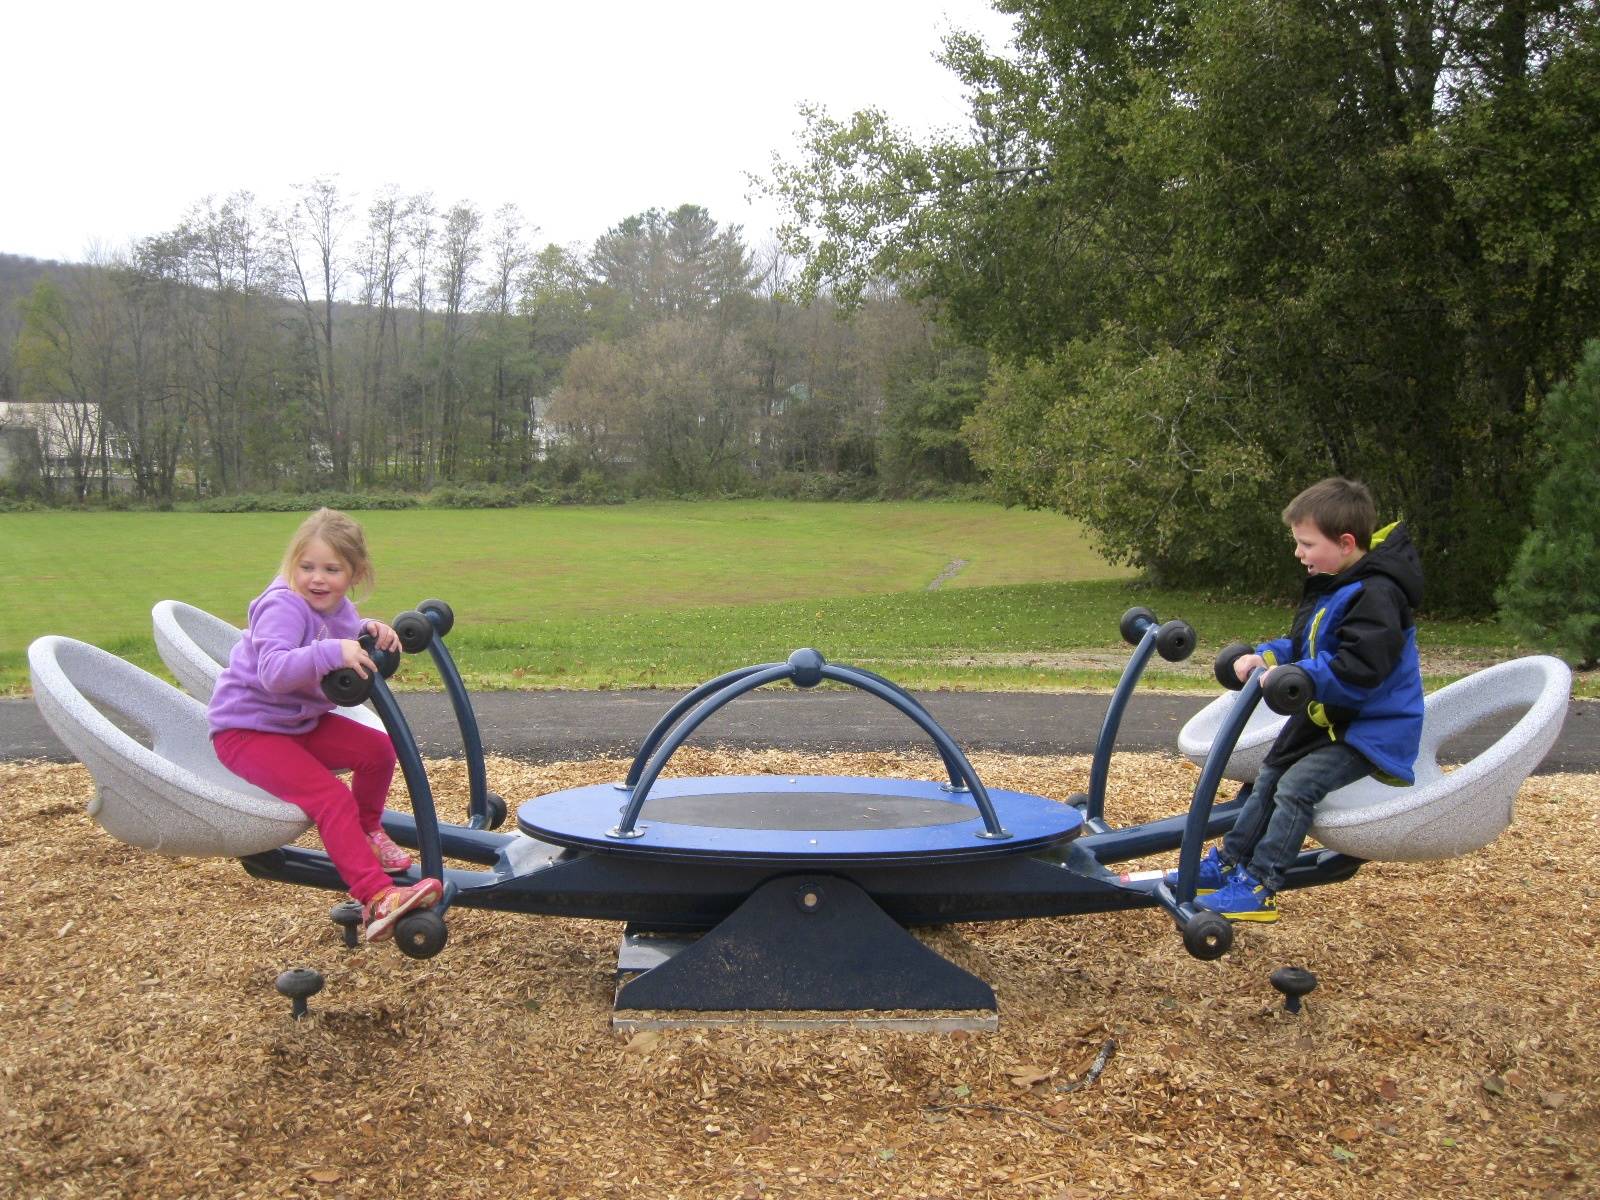 2 students try out teeter totter.